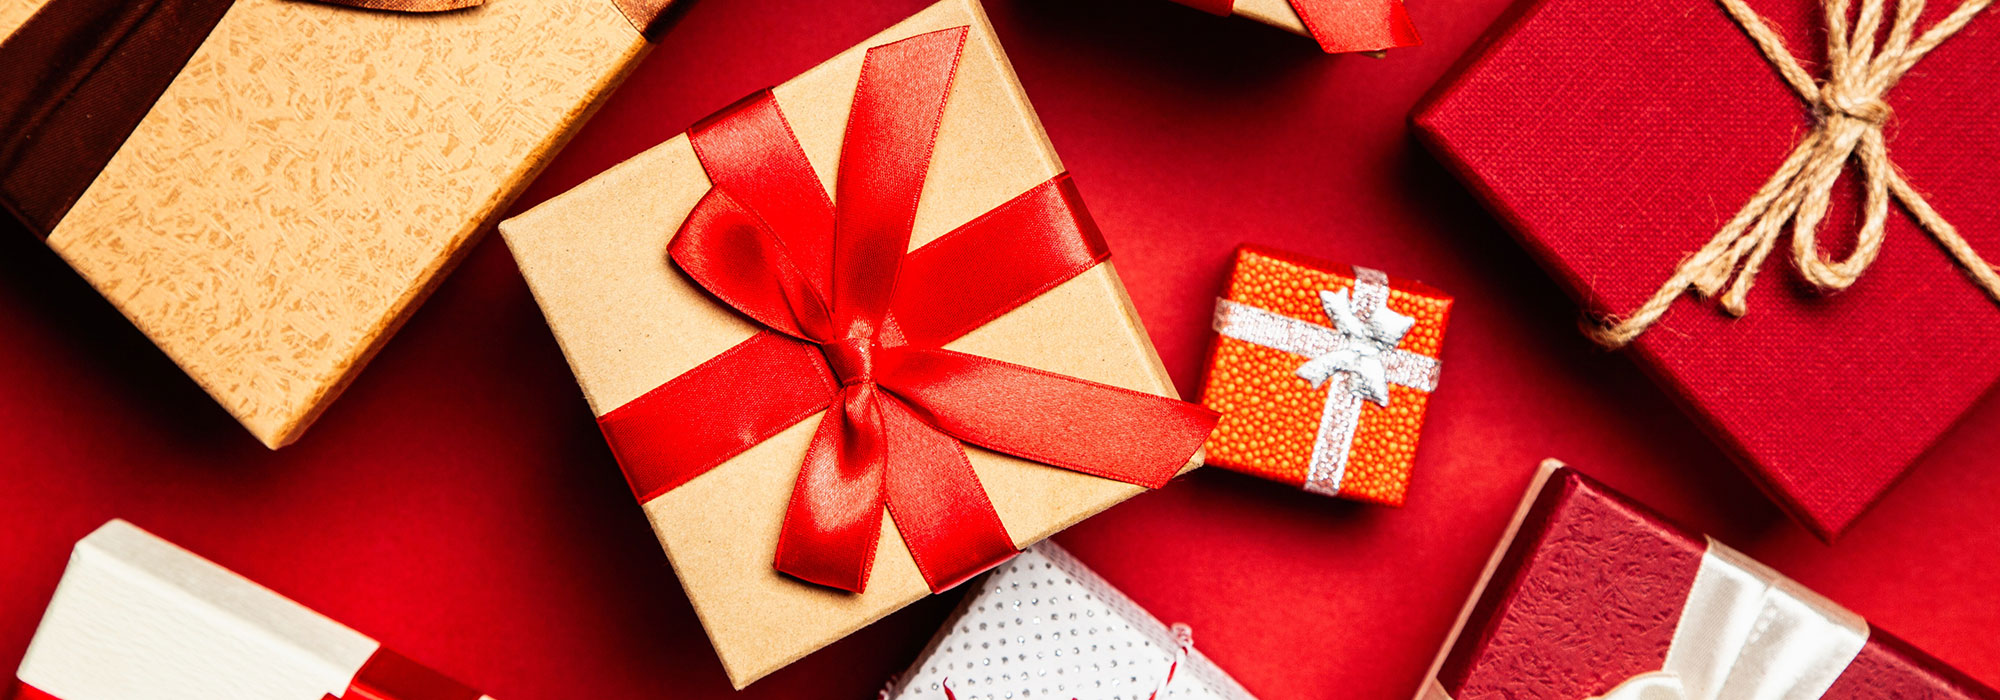 5 reasons to celebrate Christmas with personalised items